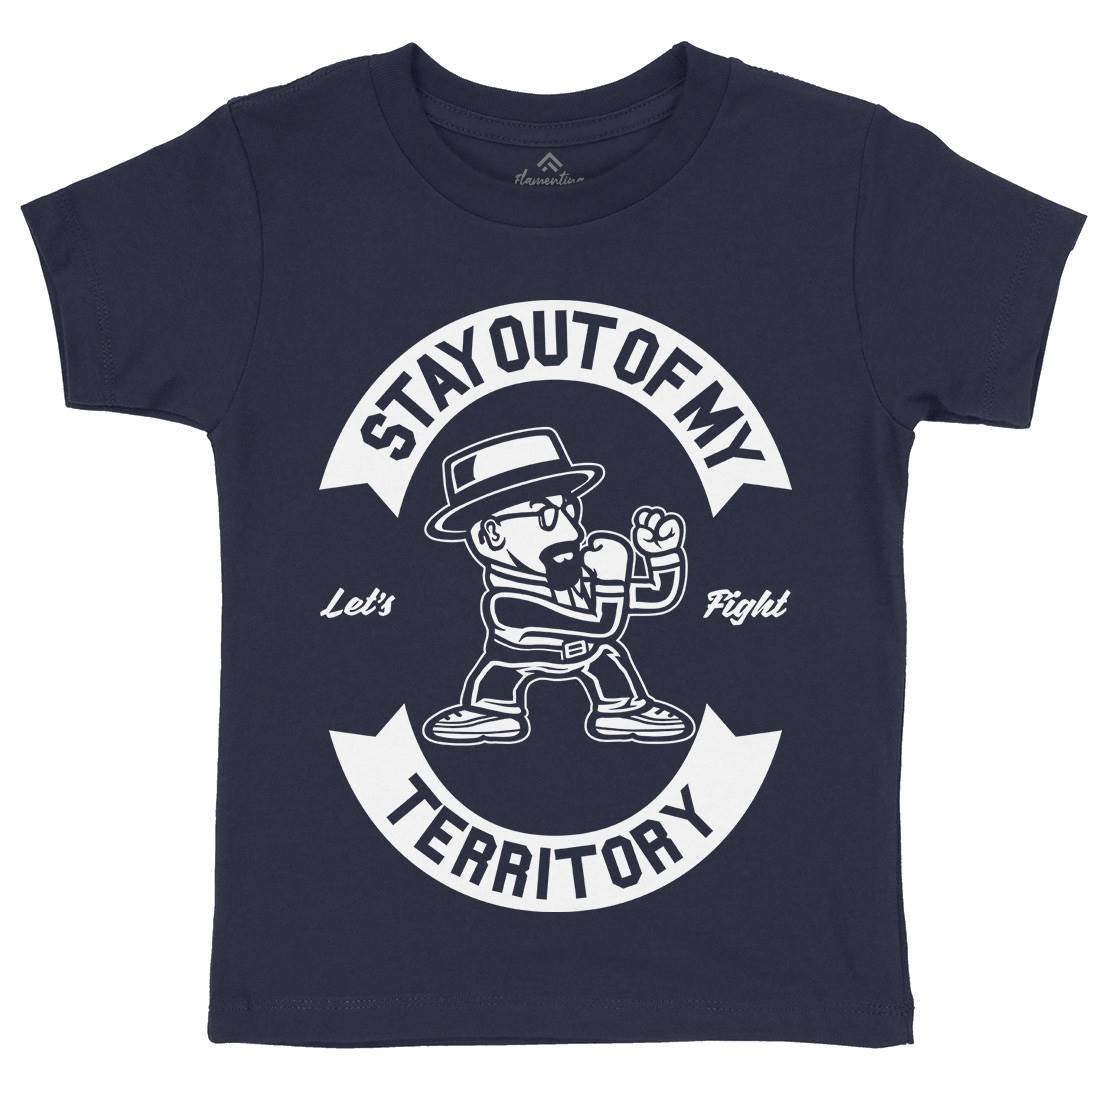 Stay Out Kids Crew Neck T-Shirt Retro A284